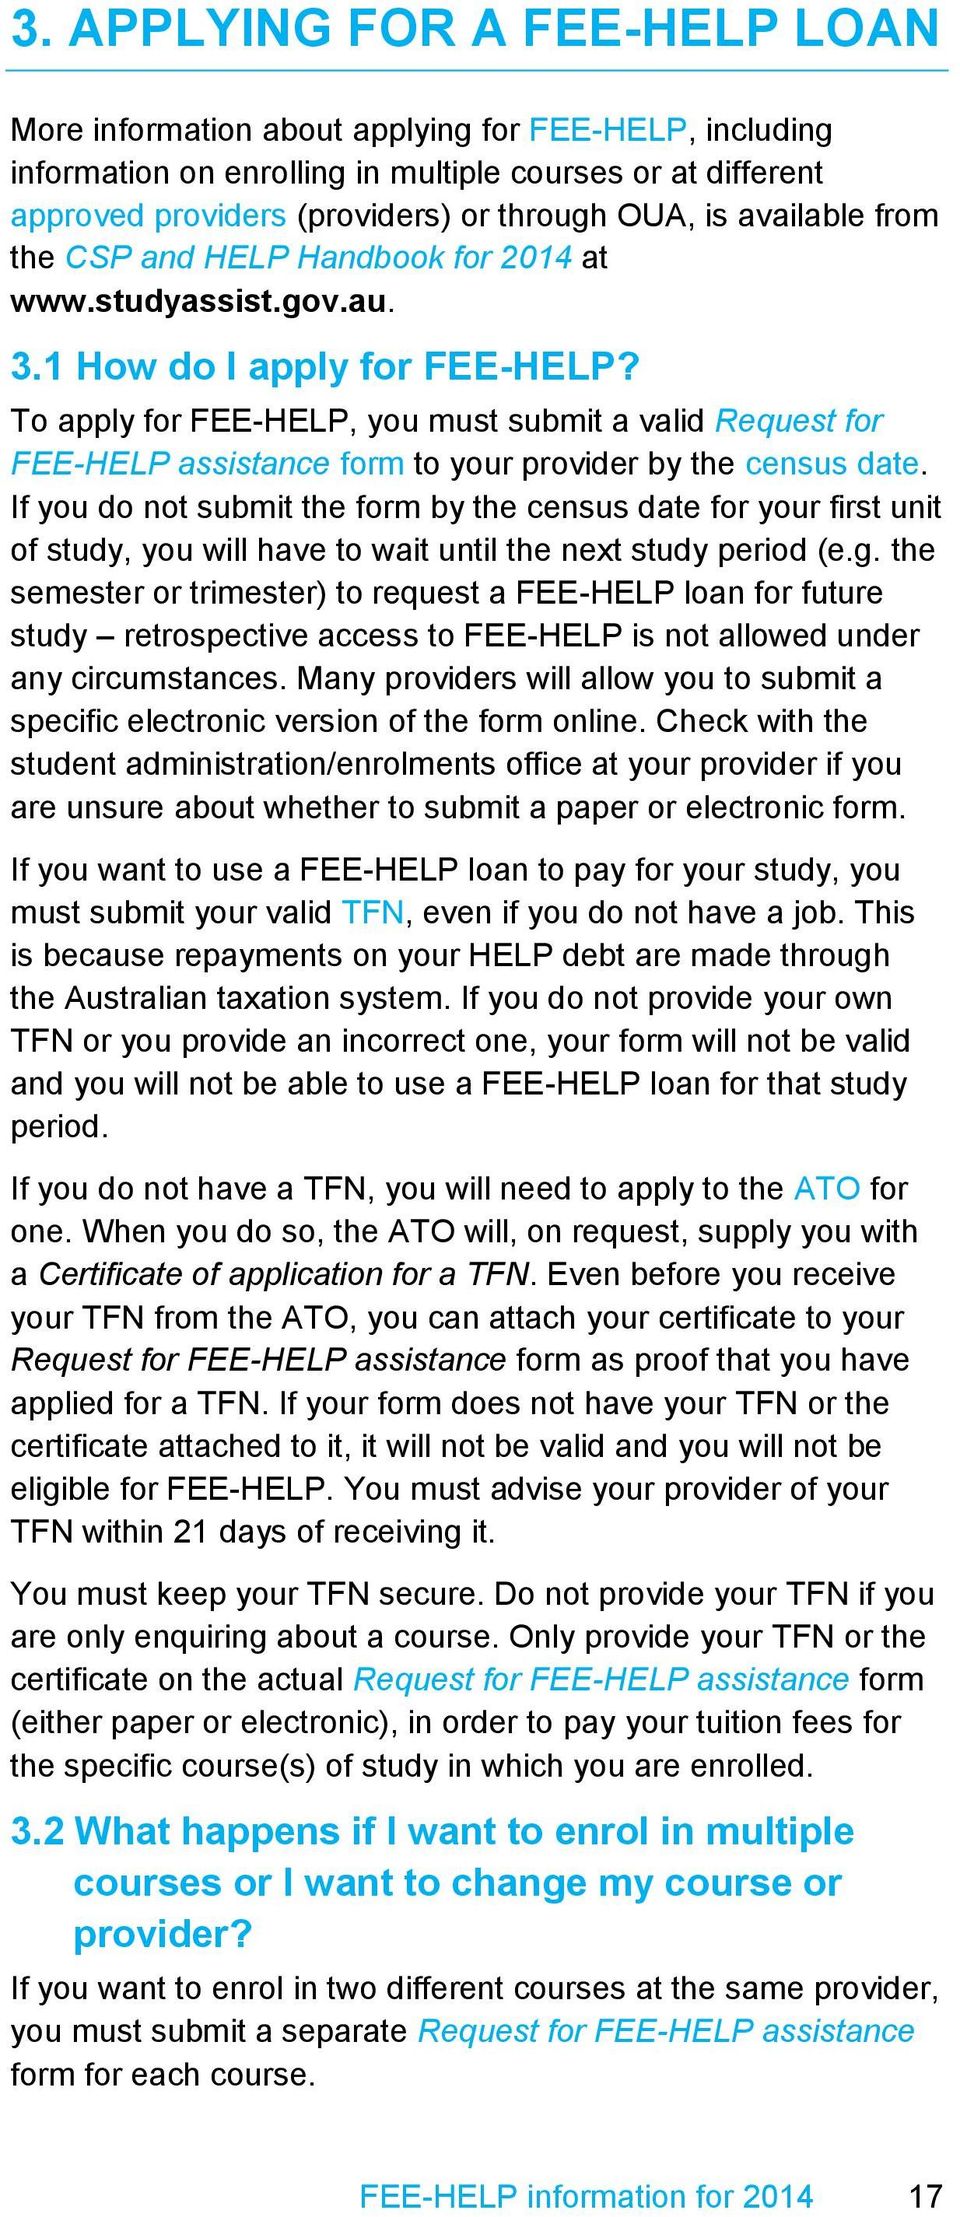 To apply for FEE-HELP, you must submit a valid Request for FEE-HELP assistance form to your provider by the census date.